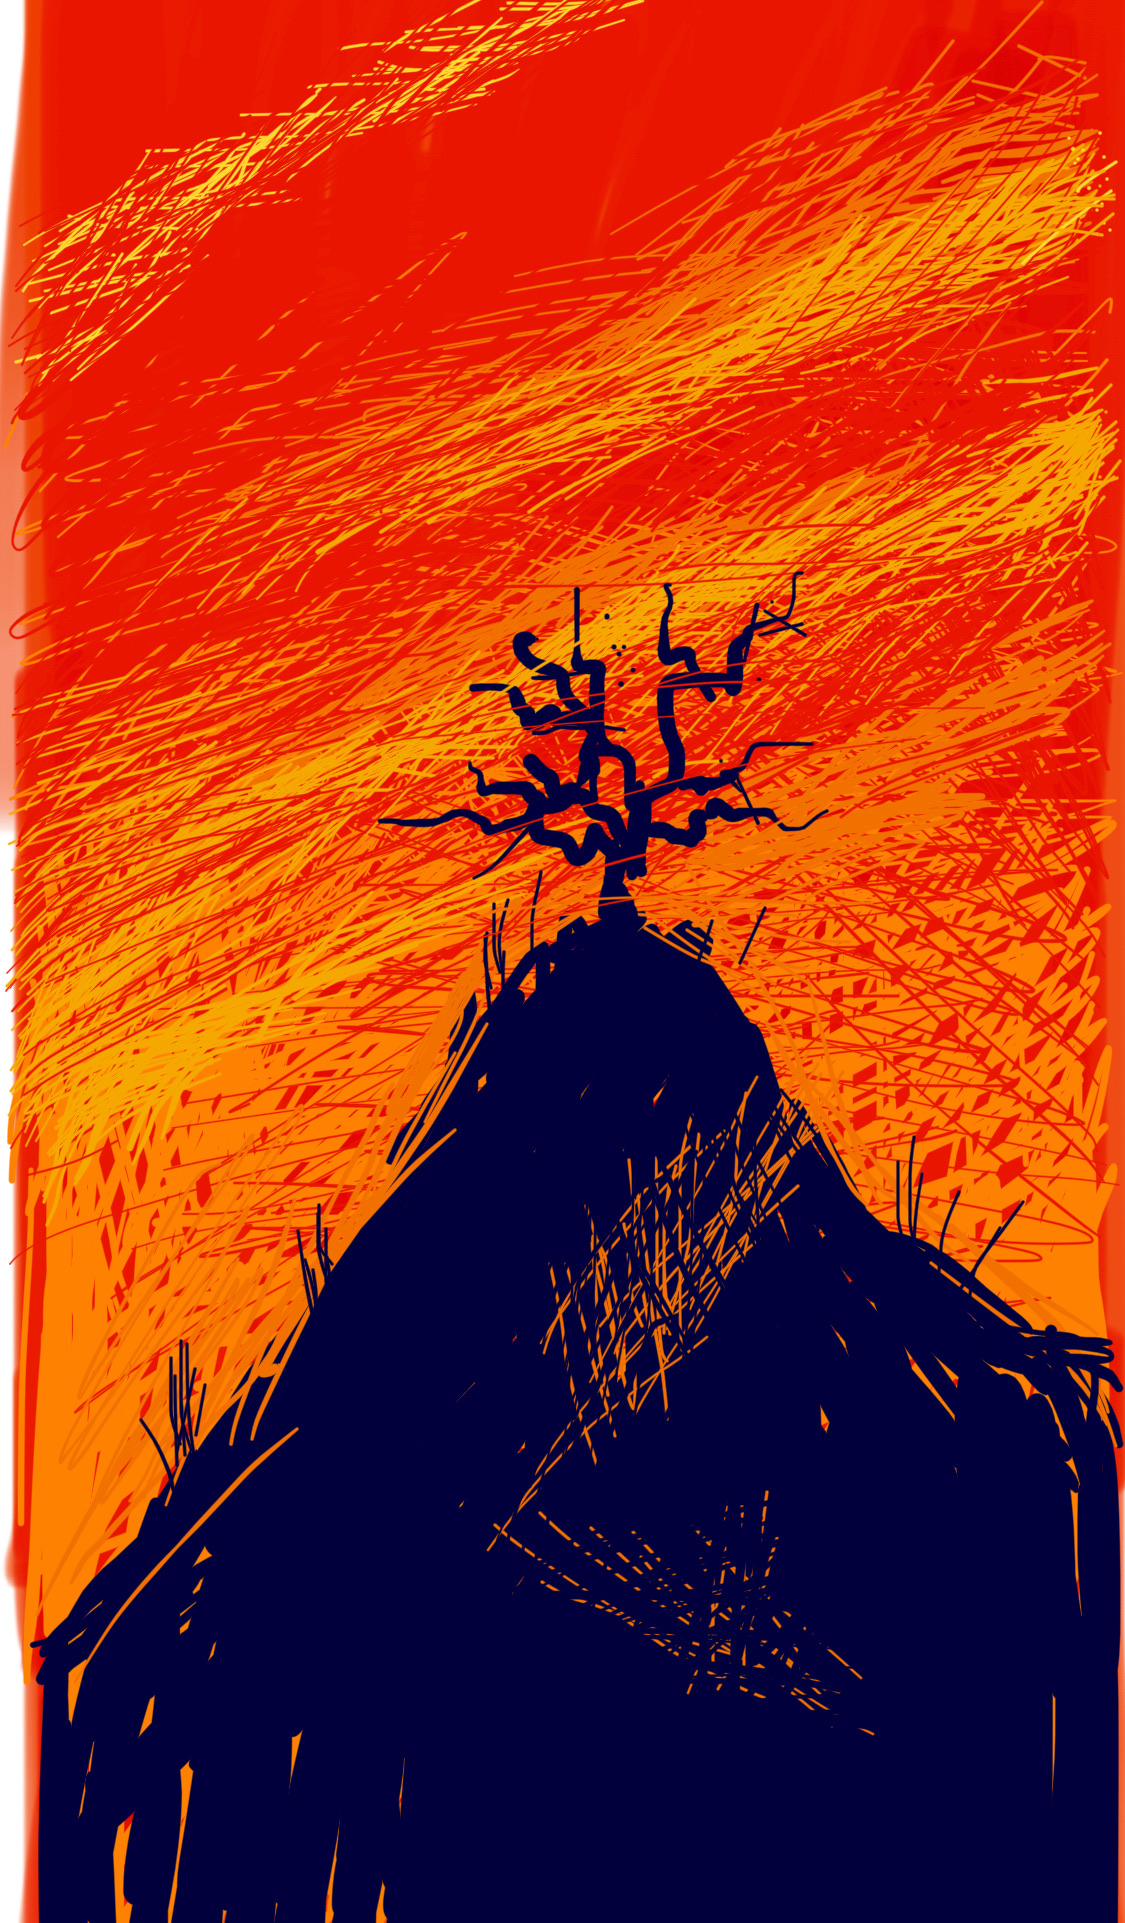 A lone Joshua tree stands on top of a sharp mountain peak, the sky burning